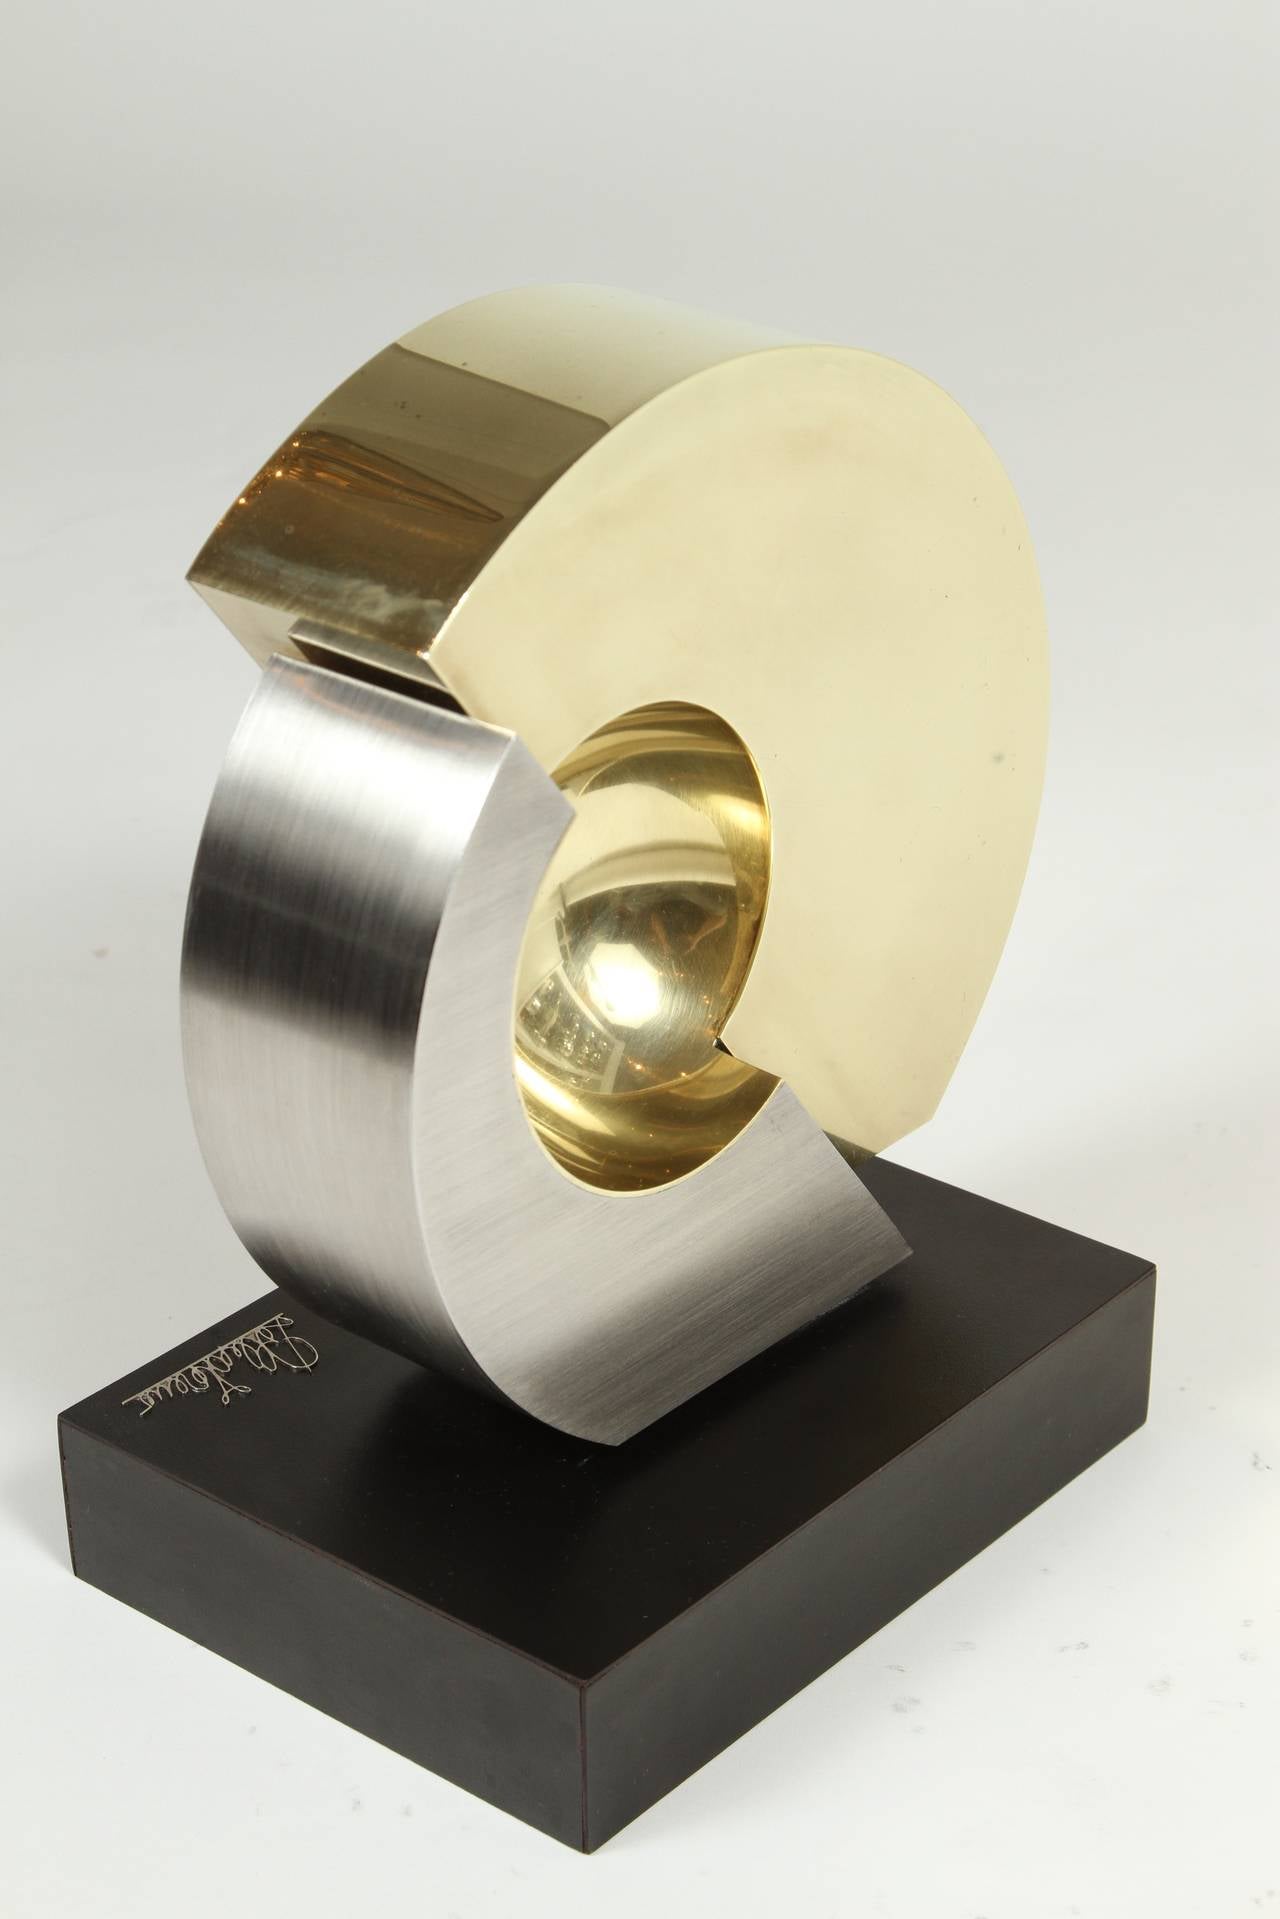 Great geometric piece in brushed stainless and mirror polished brass, titled 